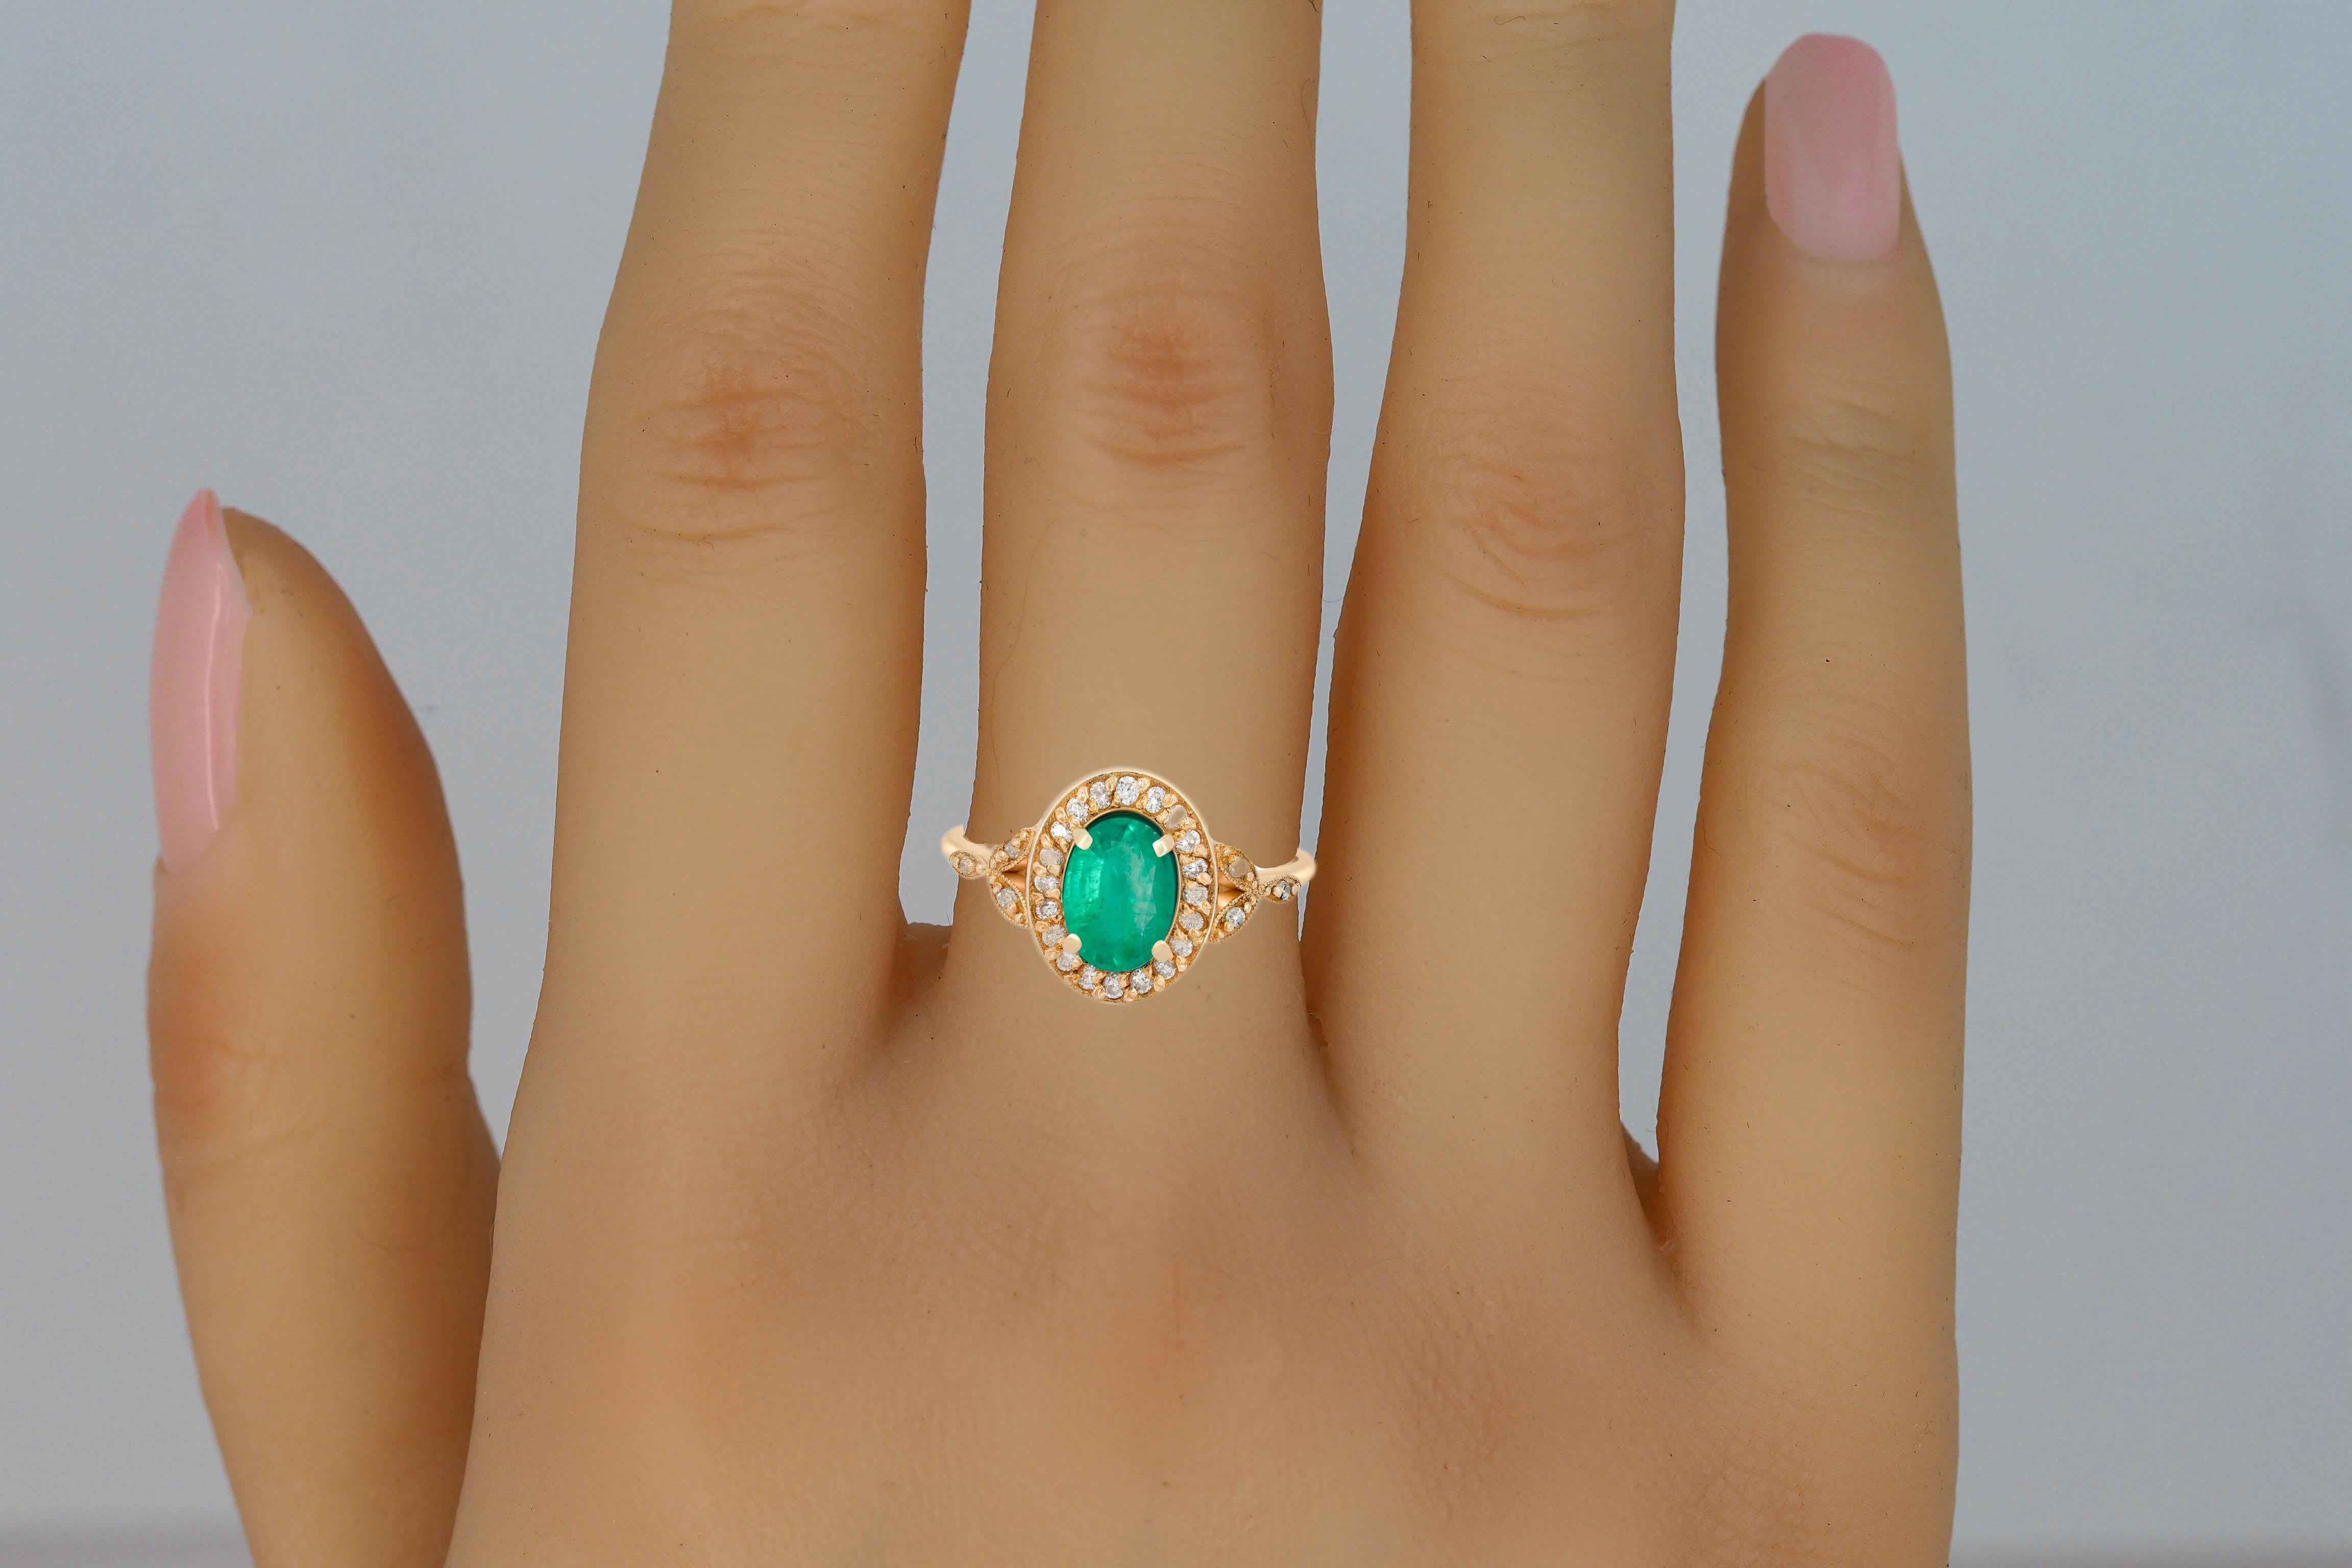 For Sale:  Emerald vintage style gold ring. 8